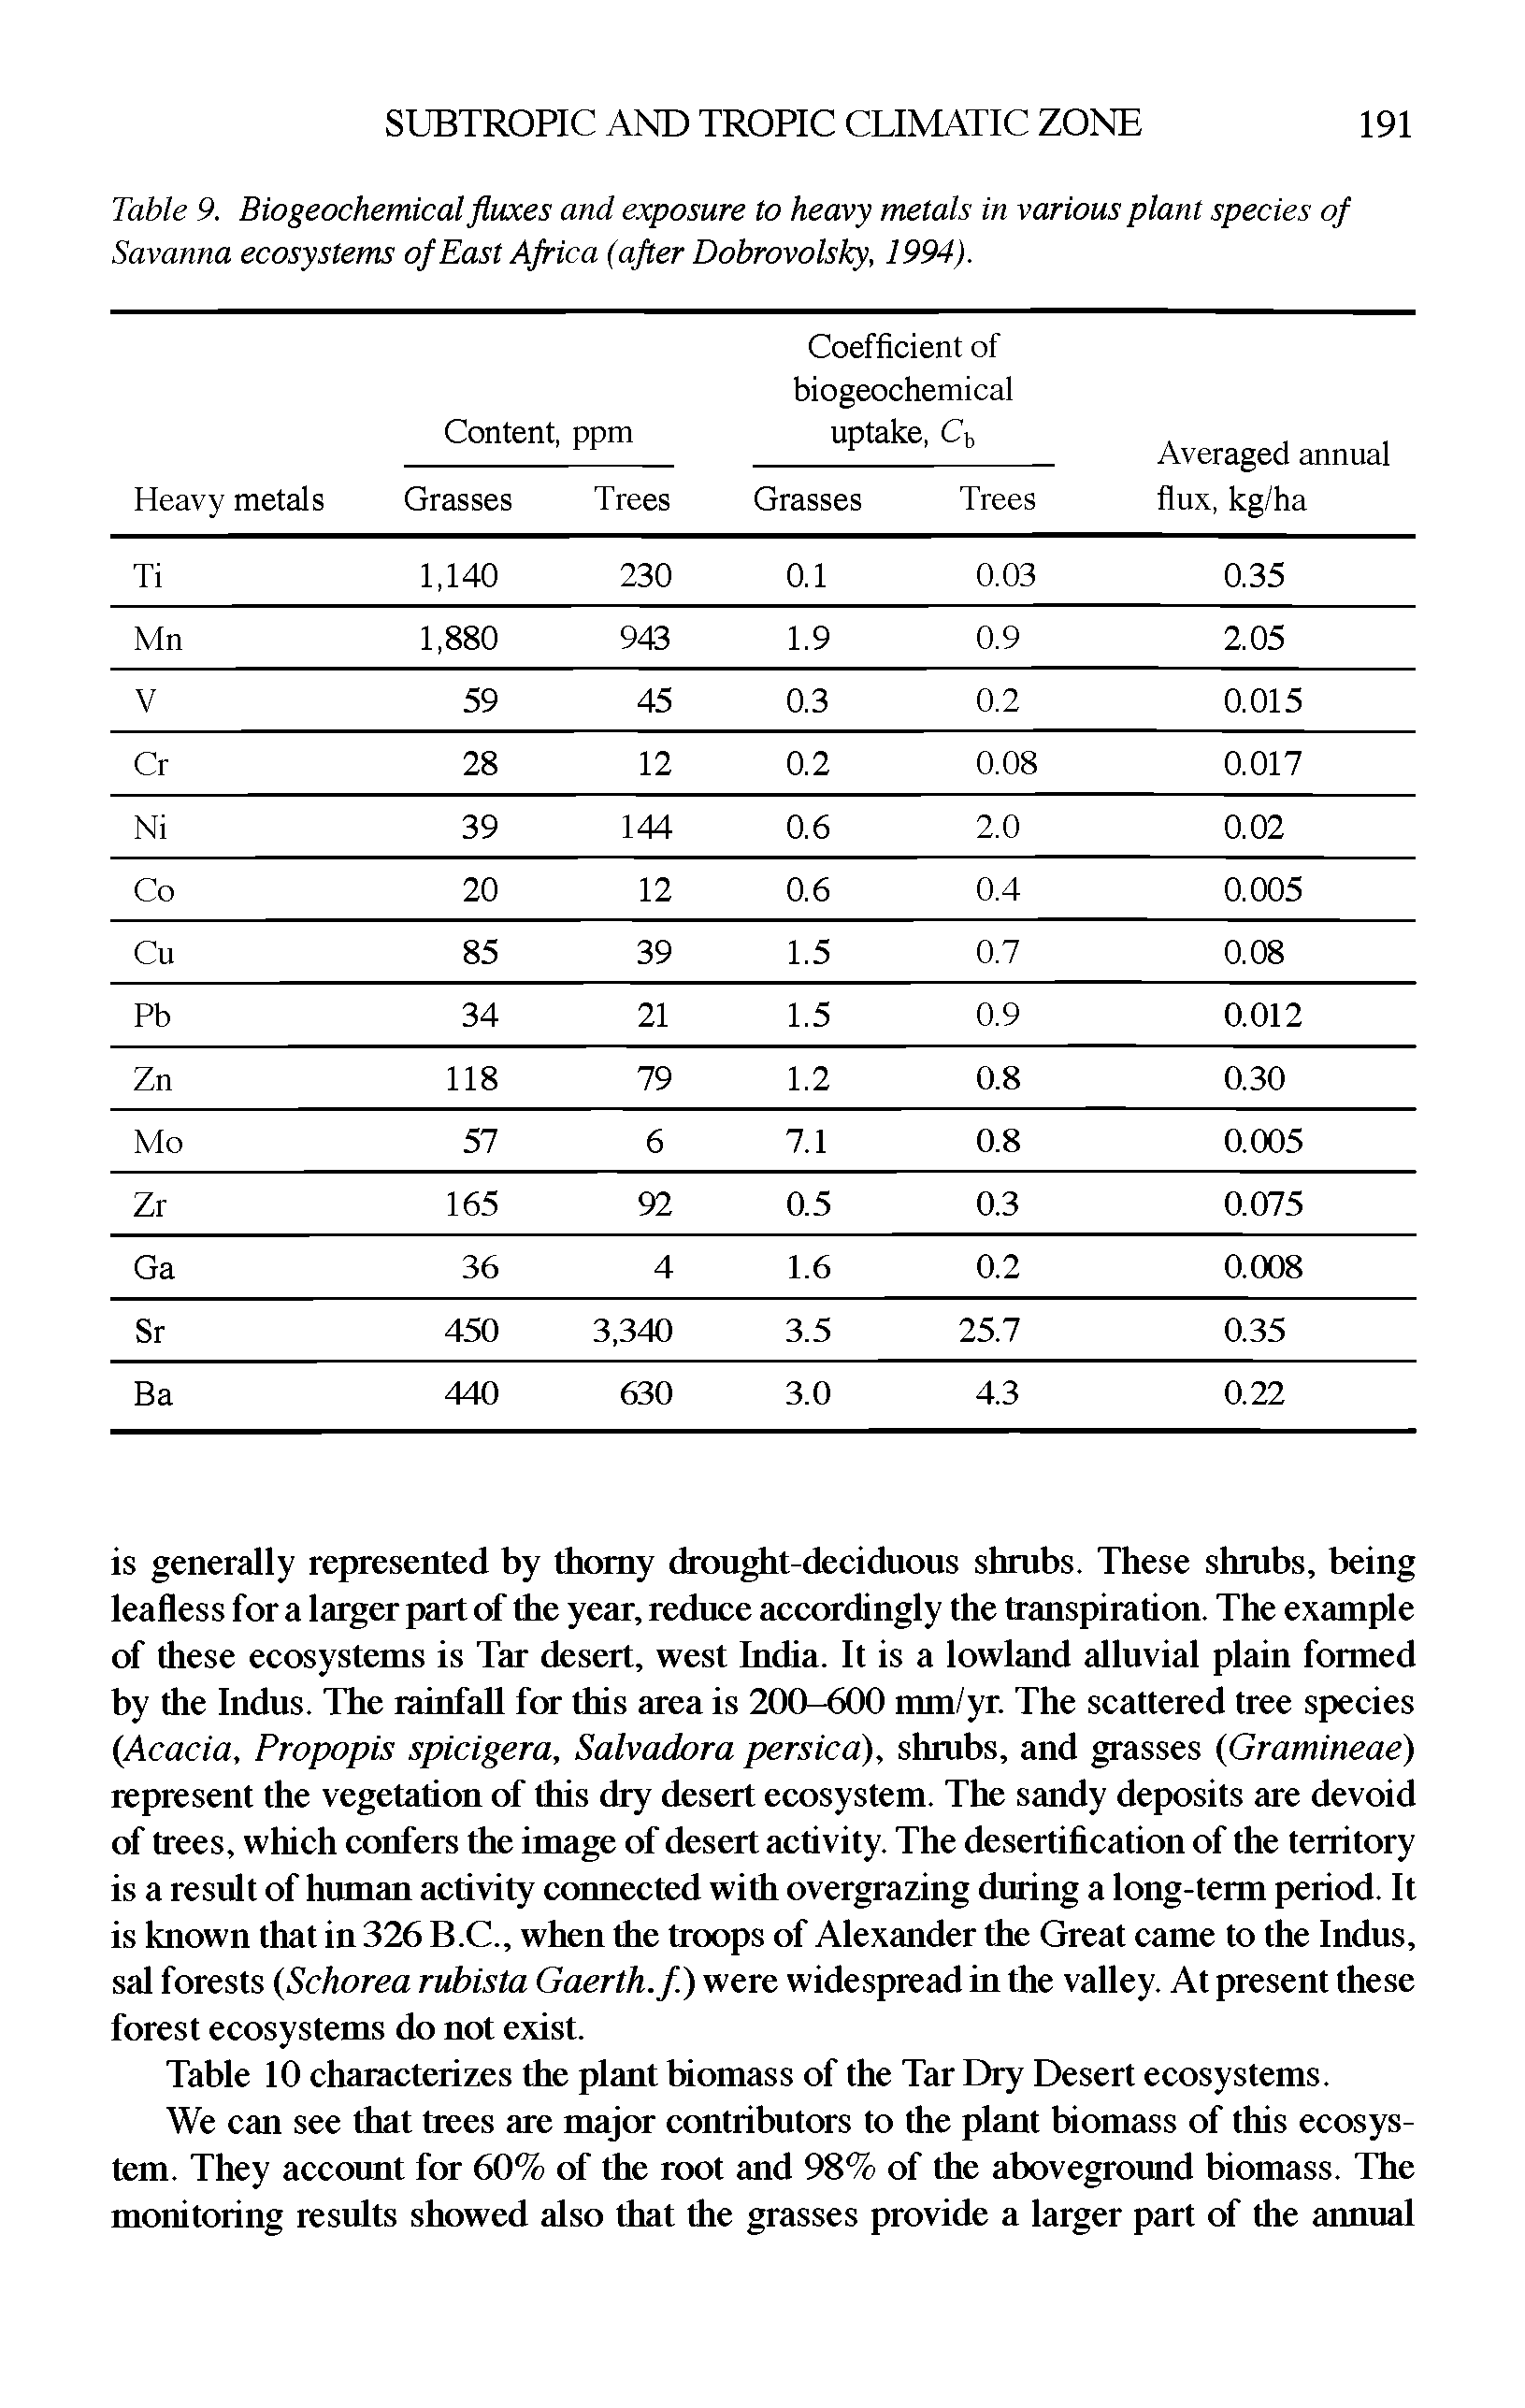 Table 9. Bio geochemical fluxes and exposure to heavy metals in various plant species of Savanna ecosystems of East Africa (after Dobrovolsky, 1994).